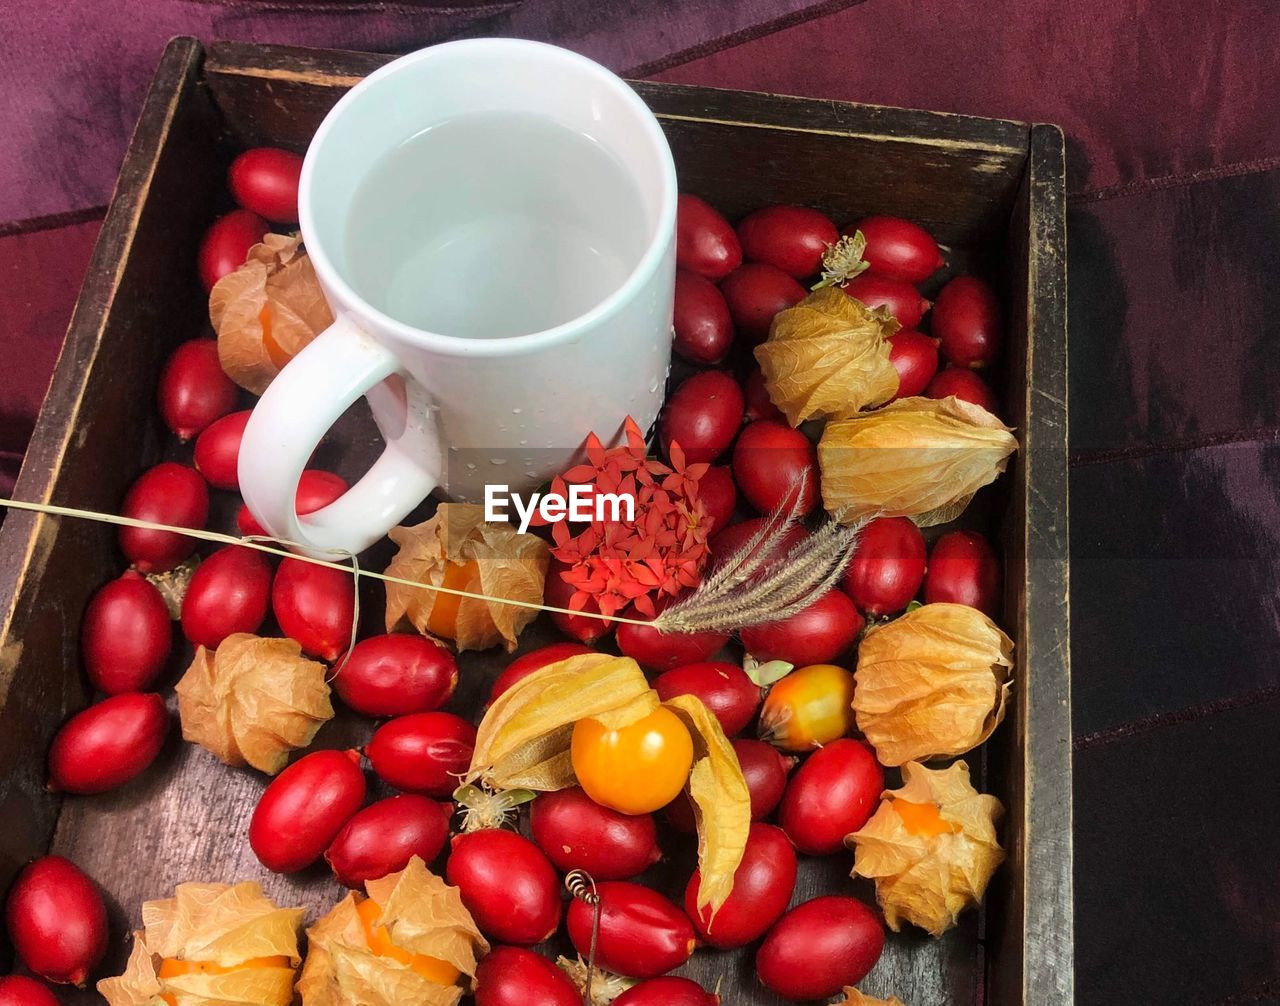 HIGH ANGLE VIEW OF FRUITS IN TRAY